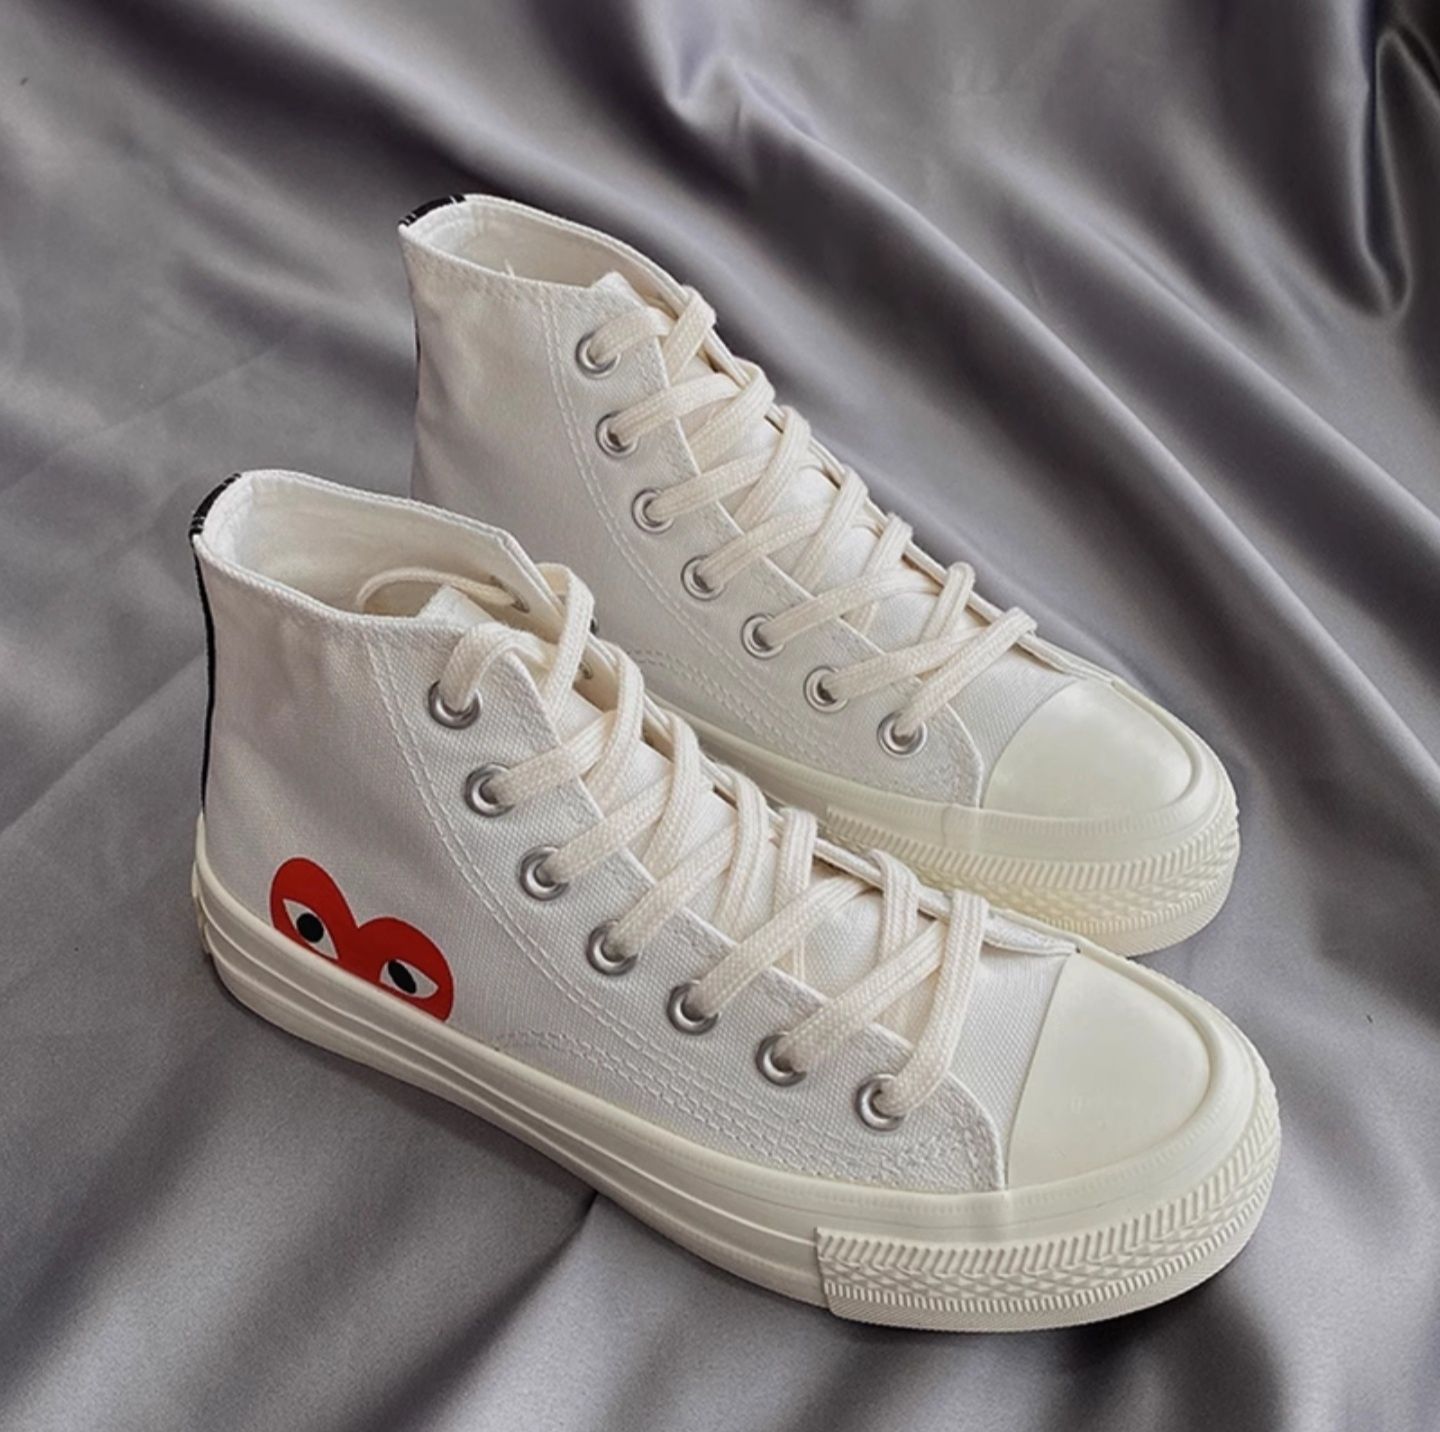 Adidasii Converse Comme des Garcons